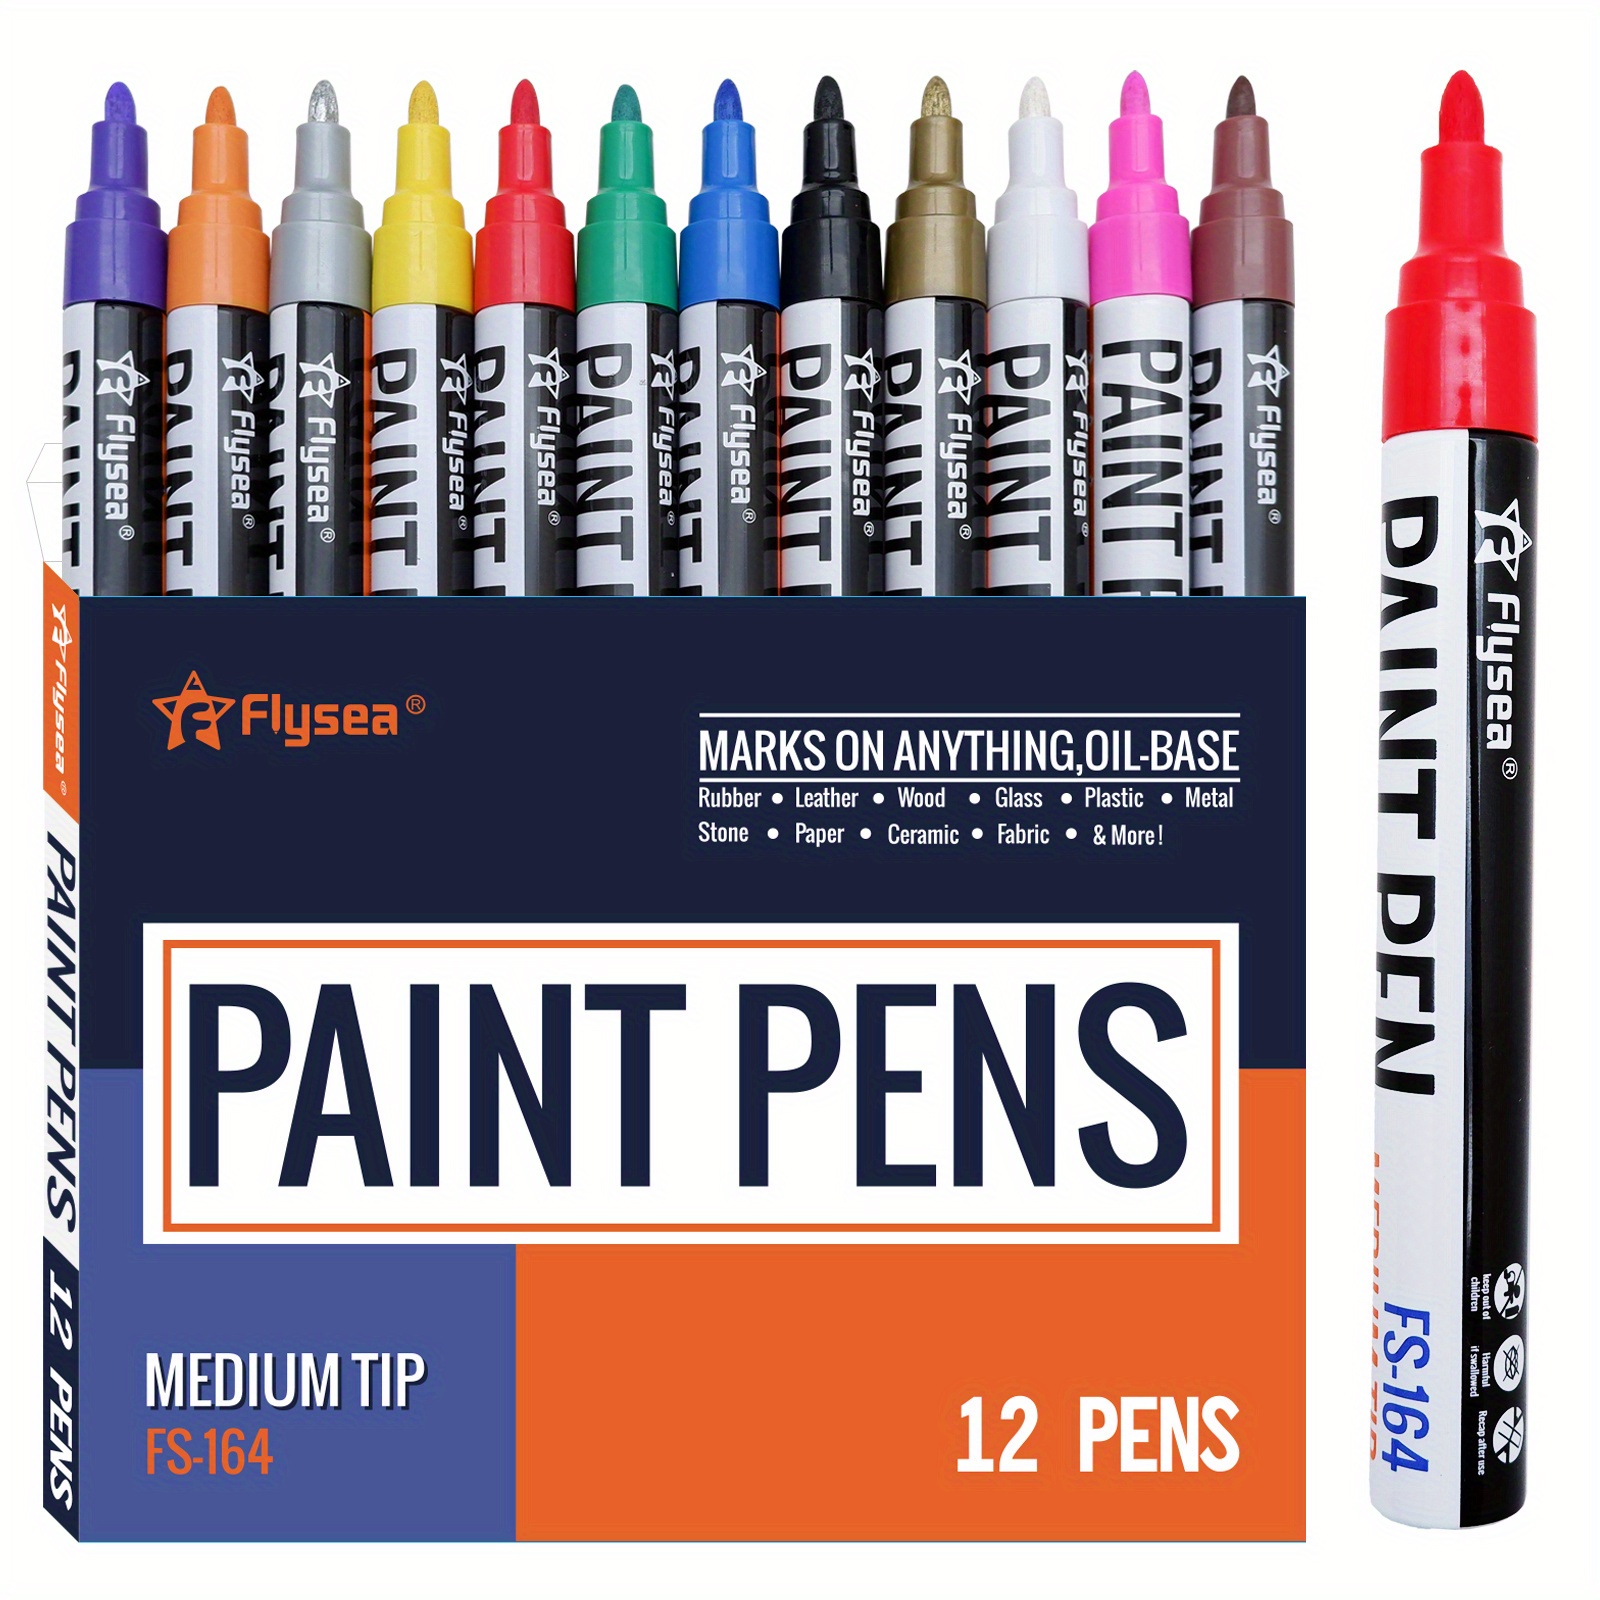  Permanent Paint Markers for Metal - 8 Oil Based Paint Markers,  Medium Tip Paint Pens Paint Markers for Plastic Wood Fabric Glass Mugs  Canvas Rock Painting, Waterproof Paint Pen DIY Craft